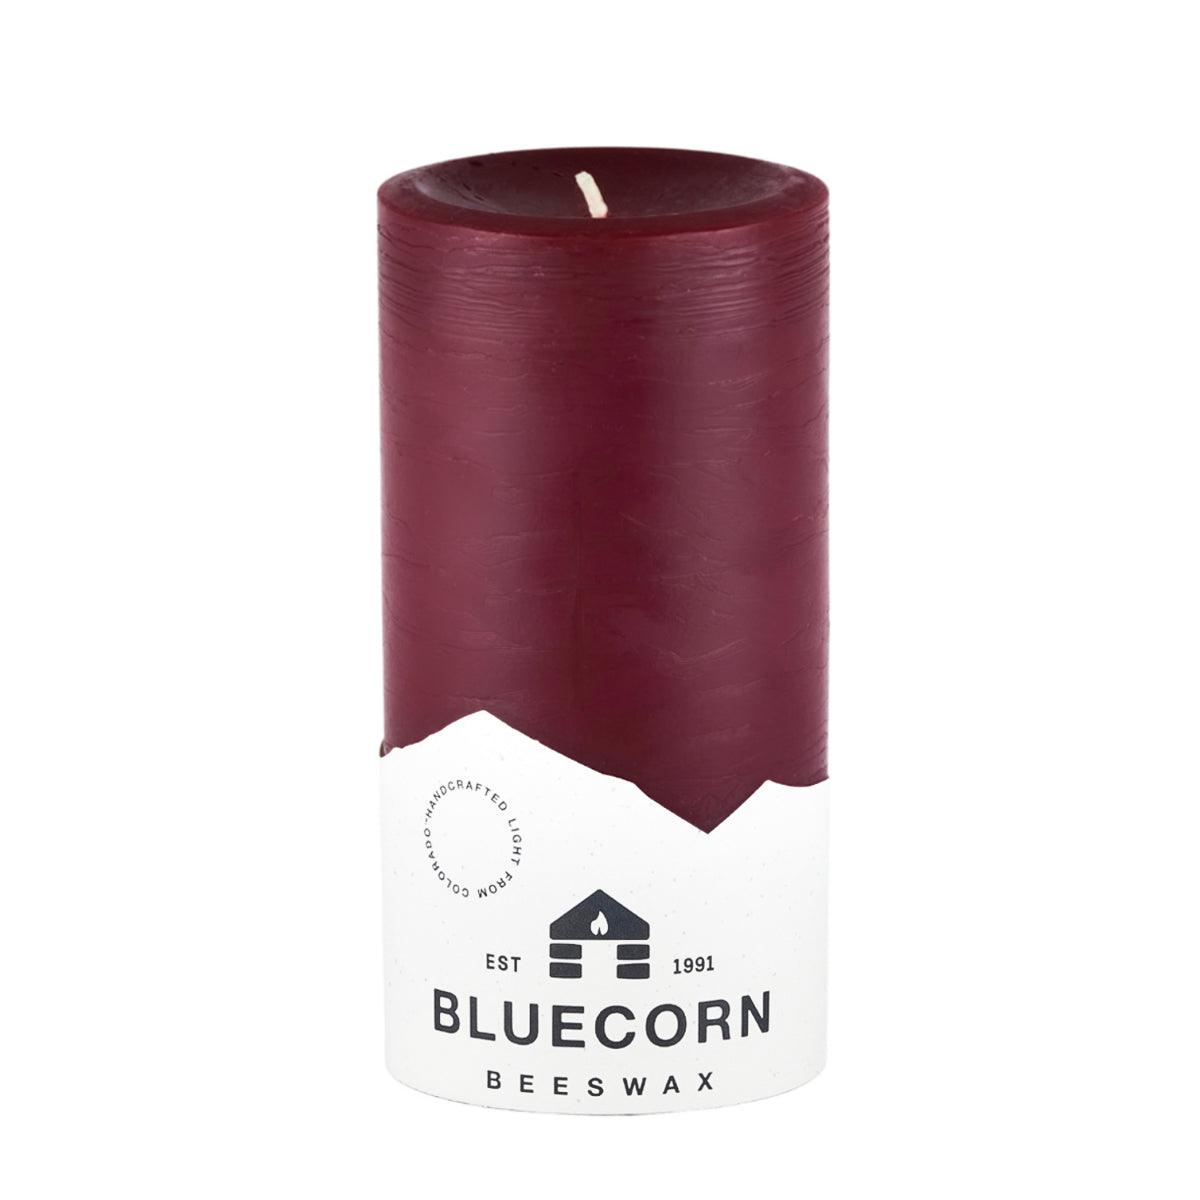 Bluecorn Beeswax 100% Pure Beeswax 3" x 6" Colored Pillar Candle is Burgundy in color. Burn Time: 90 hours. Made with 100% Pure Beeswax, is . Made with 100% pure cotton wick, no lead and paraffin free. Clean burning and non-toxic. Features Bluecorn Beeswax label printed on 100% recycled paper.